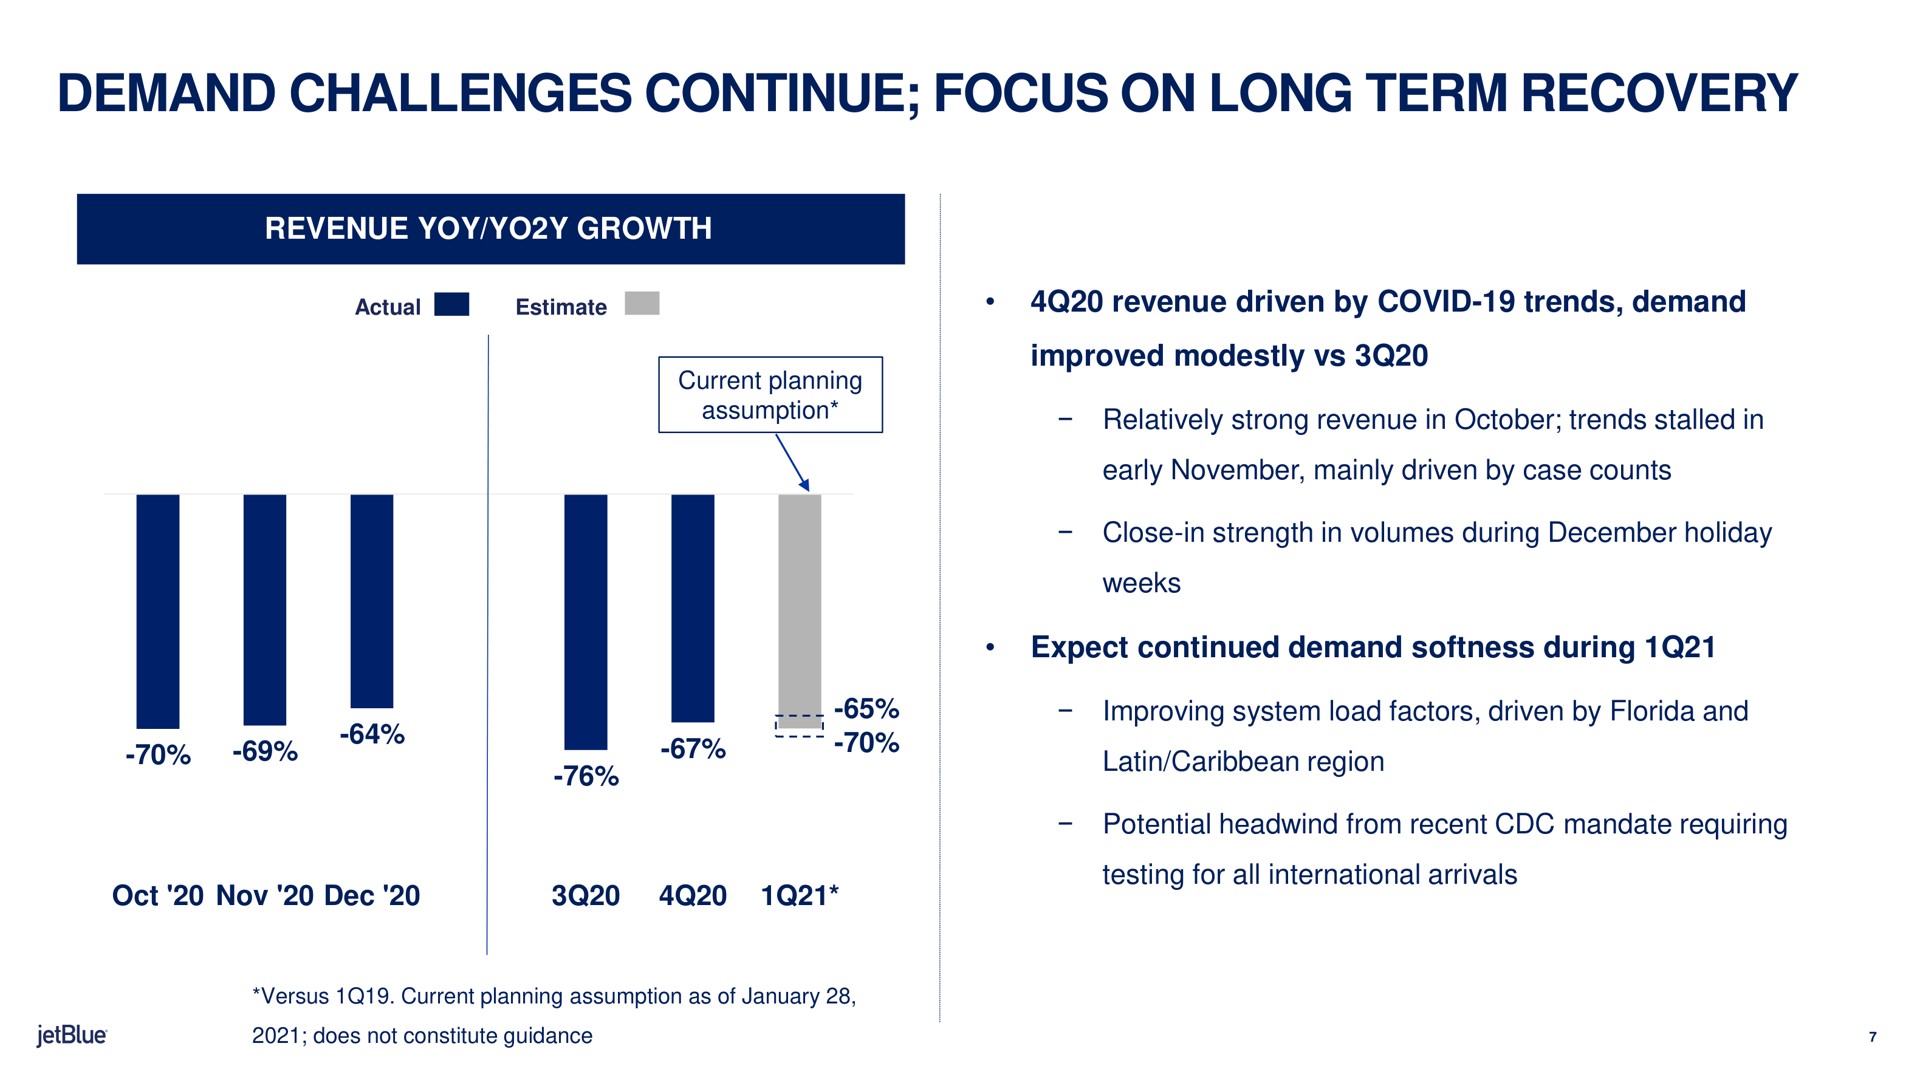 demand challenges continue focus on long term recovery revenue yoy growth revenue driven by covid trends demand improved modestly expect continued demand softness during actual estimate assumption relatively strong in stalled in region | jetBlue